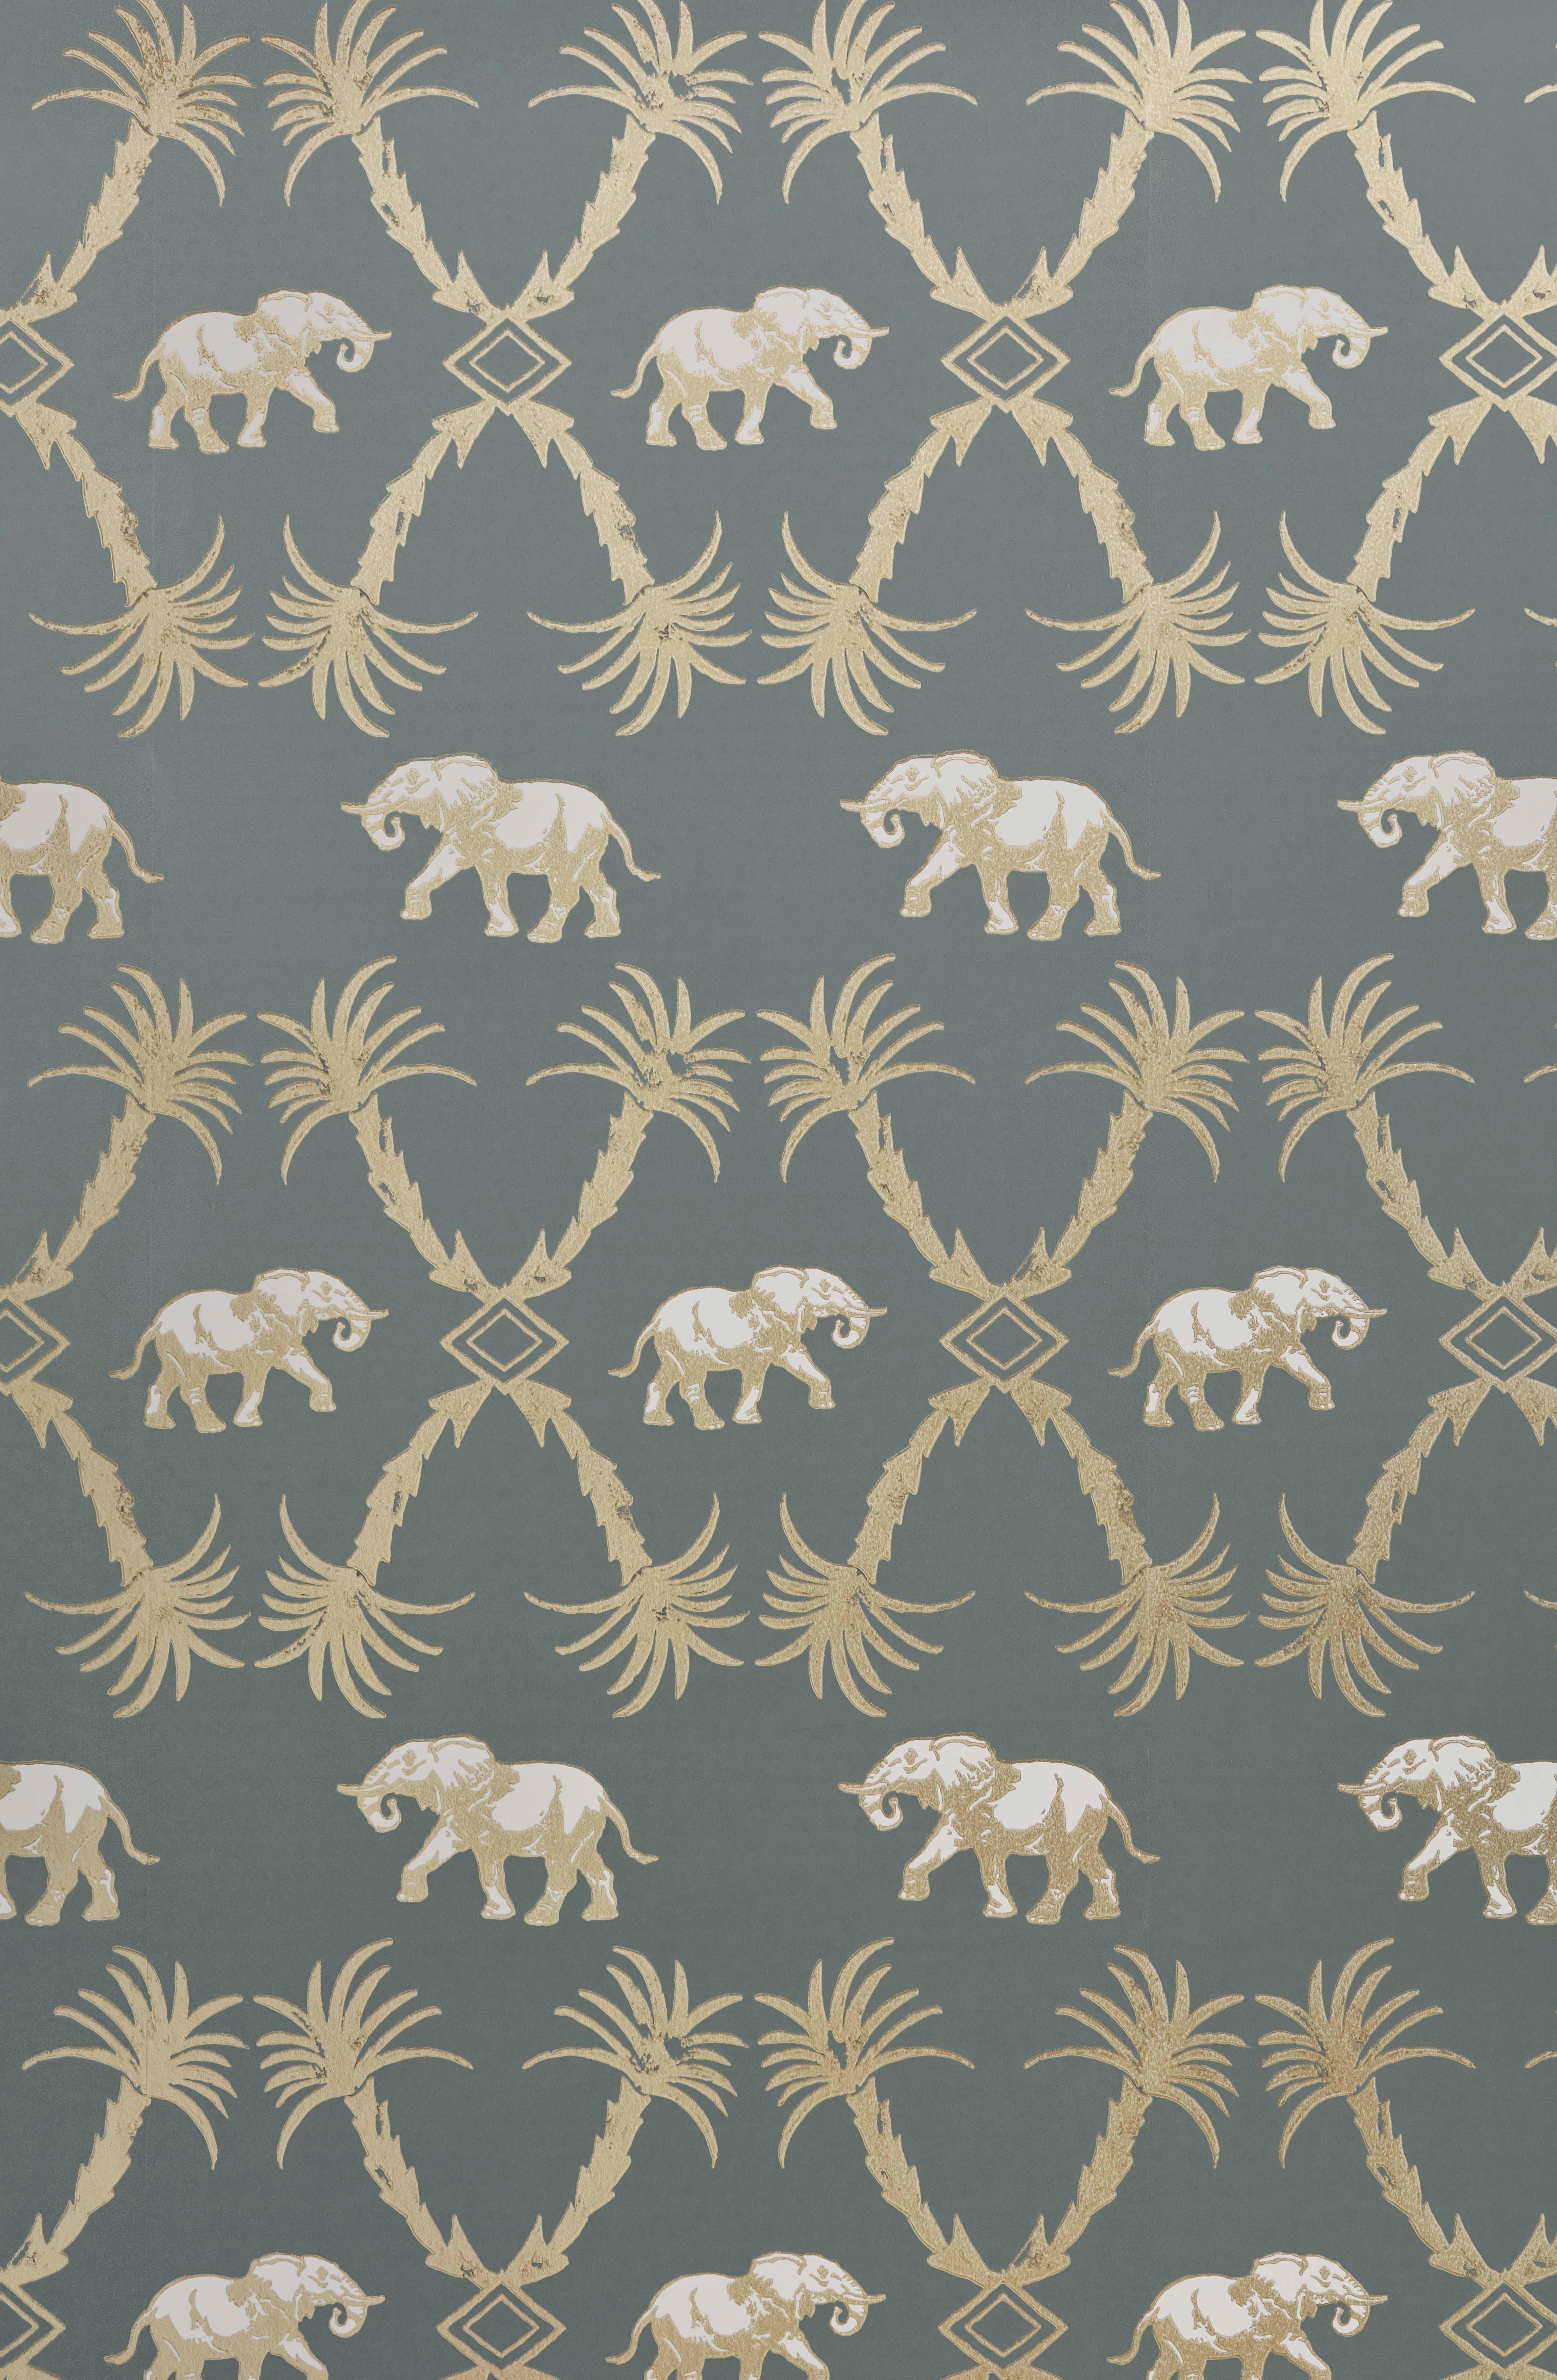 Color: Gunmetal/gold (also available in ochre/blue)
Measures: Trim width 52cm/20.5 inches
Roll length 10m
Pattern repeat Straight match
Match length 52cm/20.5 inches

A colonial inspired trellis of palm trees and marching elephants, available